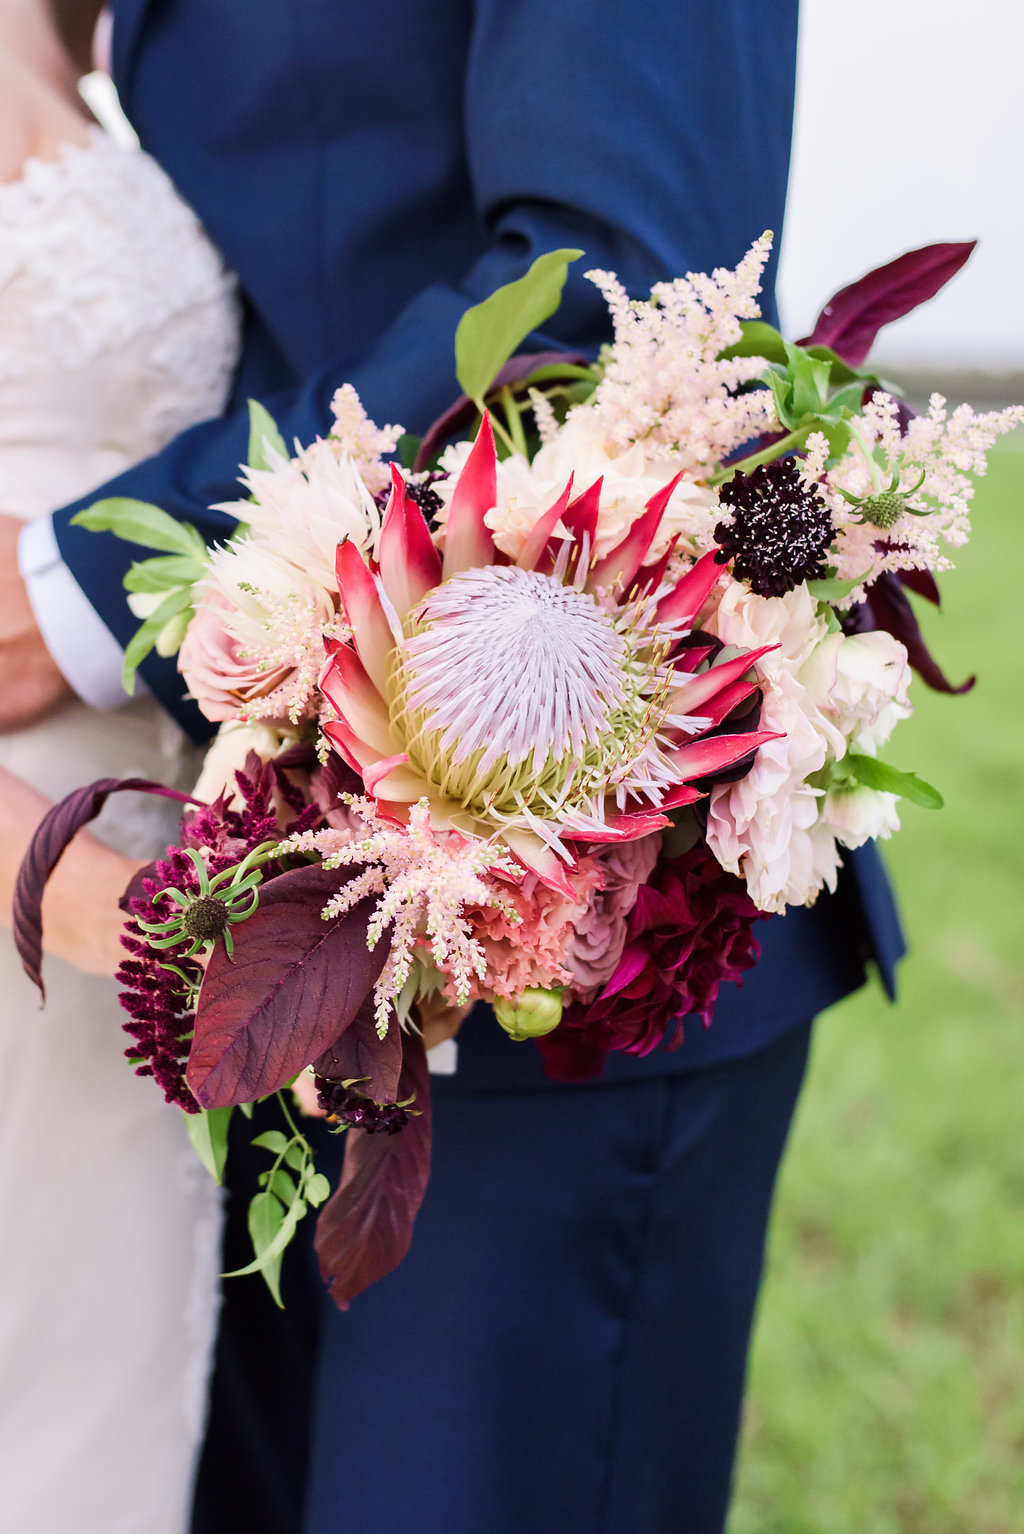 Outdoor Farm Wedding Bride and Groom Portrait, Groom in Navy Blue Suit, with Marsala Red Protea Bouquet with Greenery and BLush Pink Florals